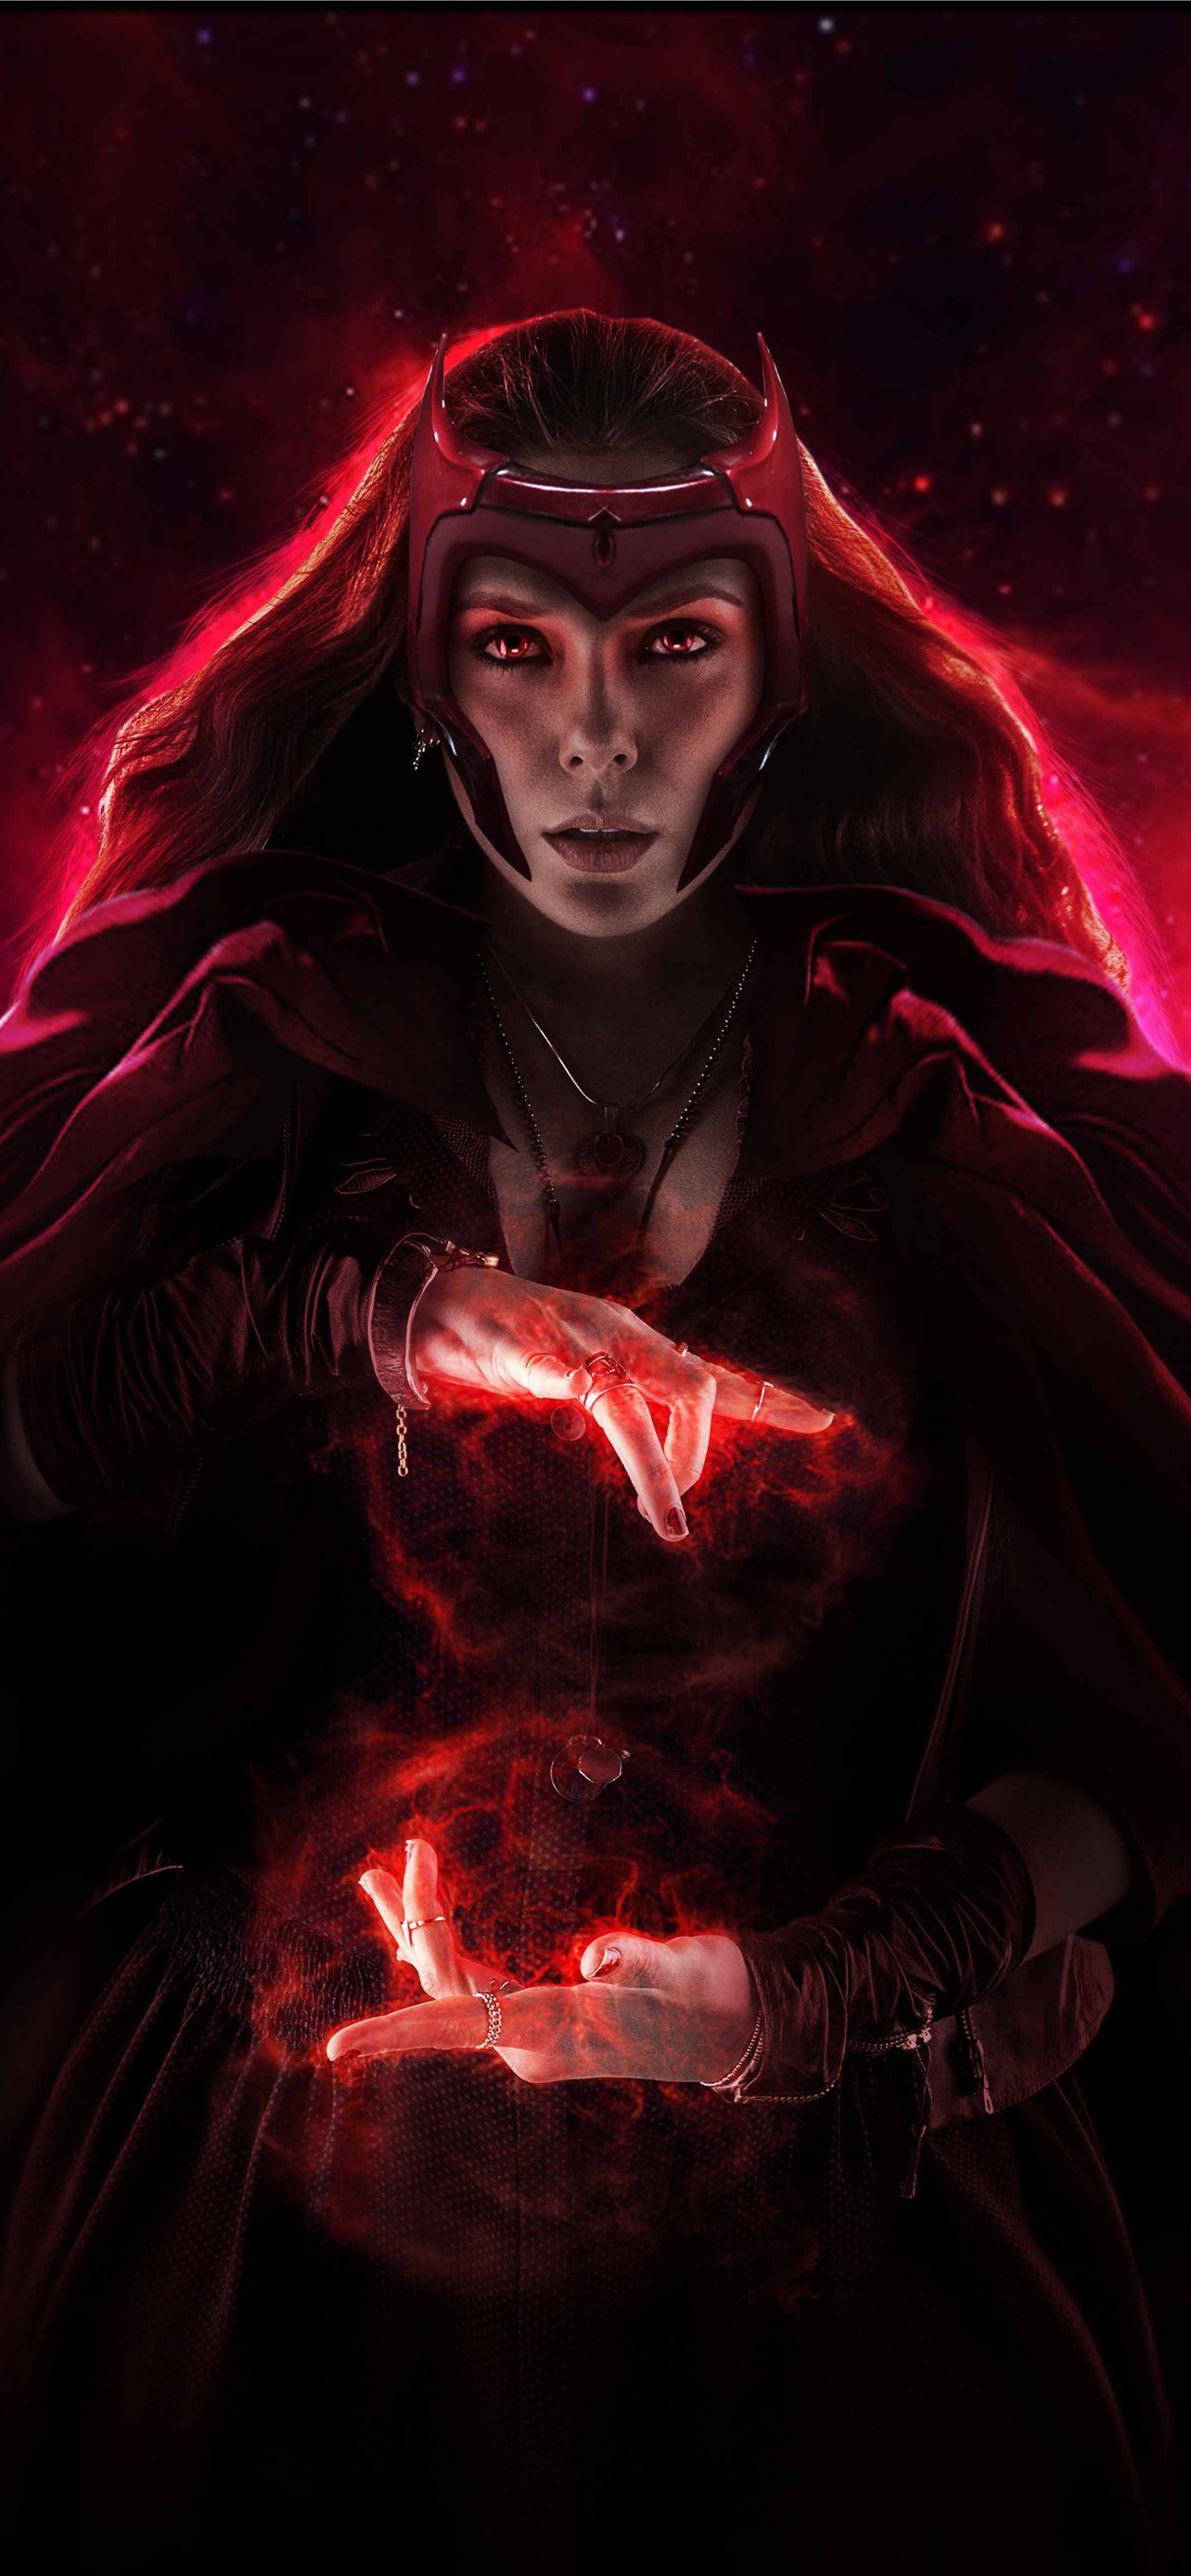 The Scarlet Witch 4k Sony Xperia X Xz Z5 Premium H Iphone Wallpapers Free Download